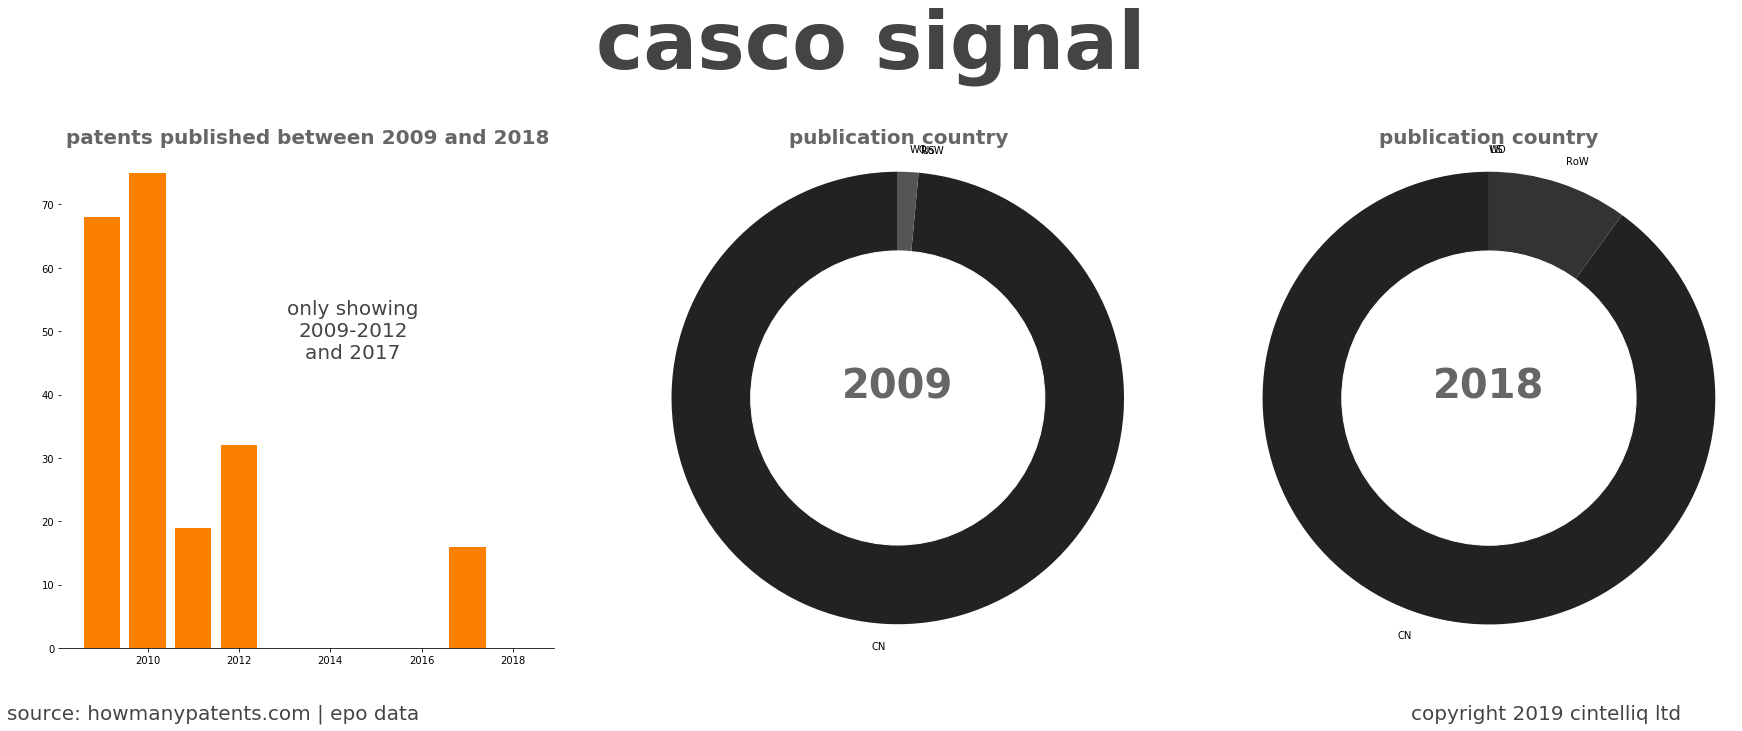 summary of patents for Casco Signal